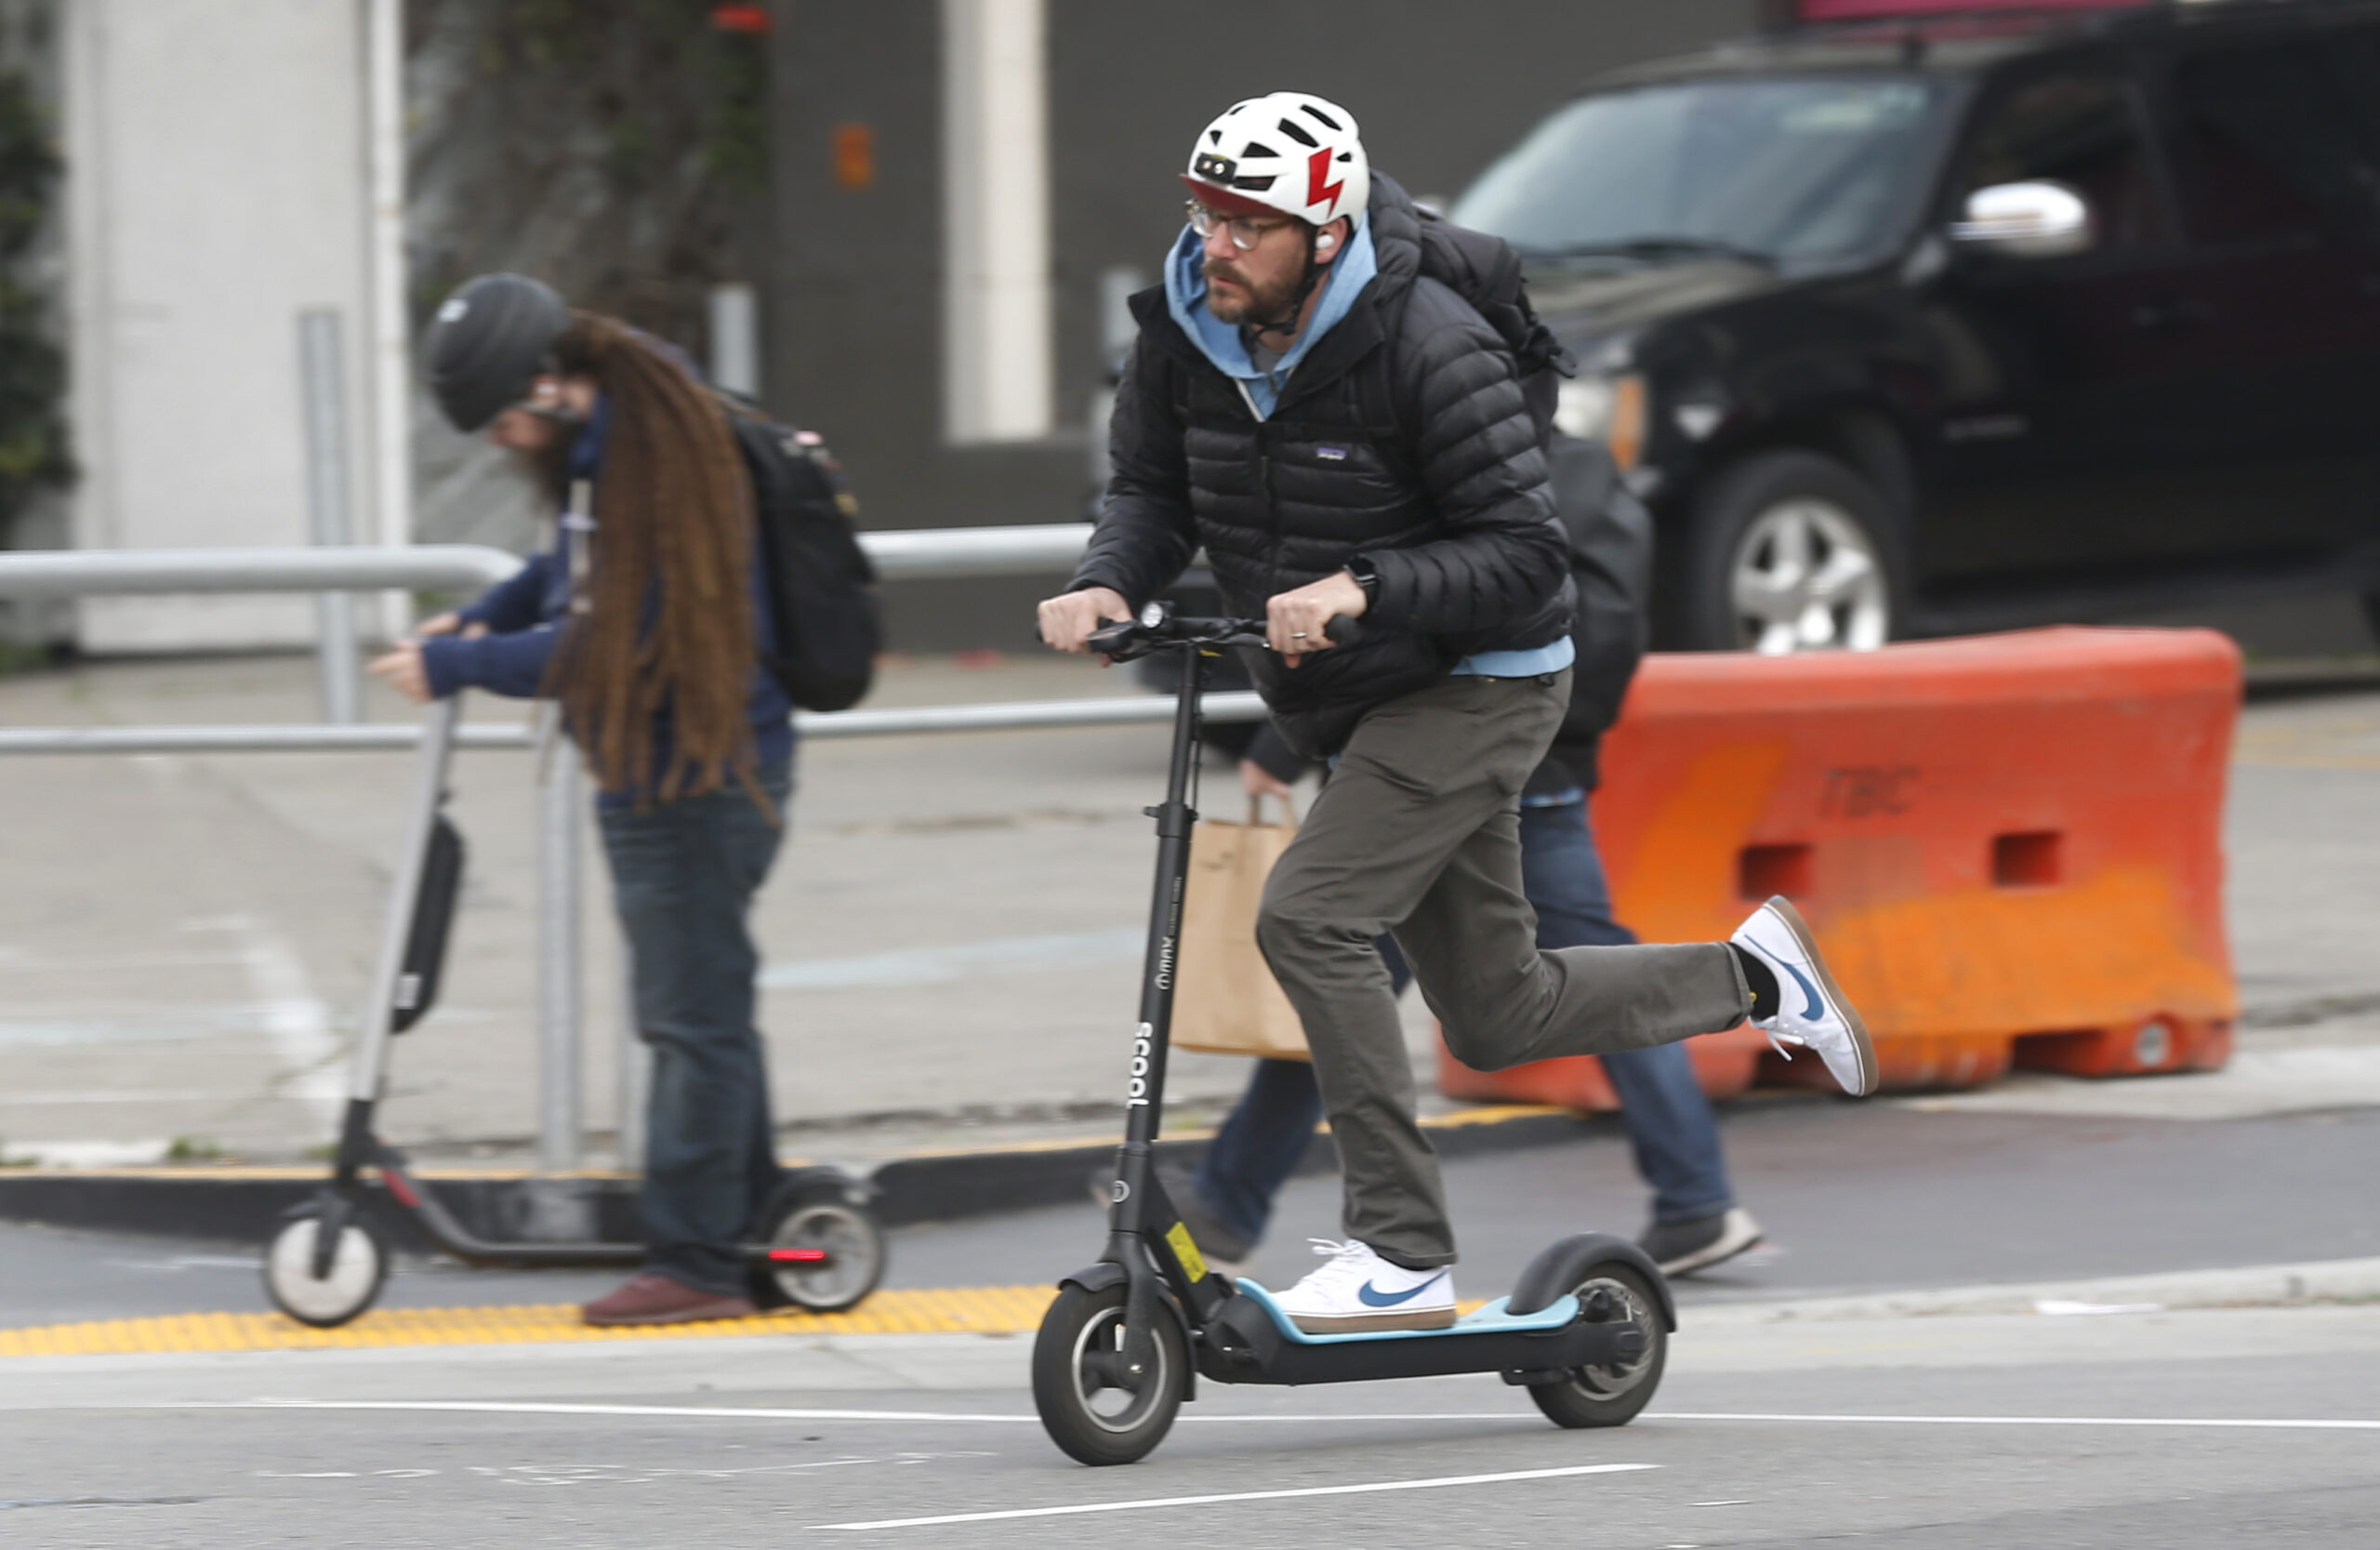 Tired of dodging scooters? SF mulls strict new rules to keep them off sidewalks